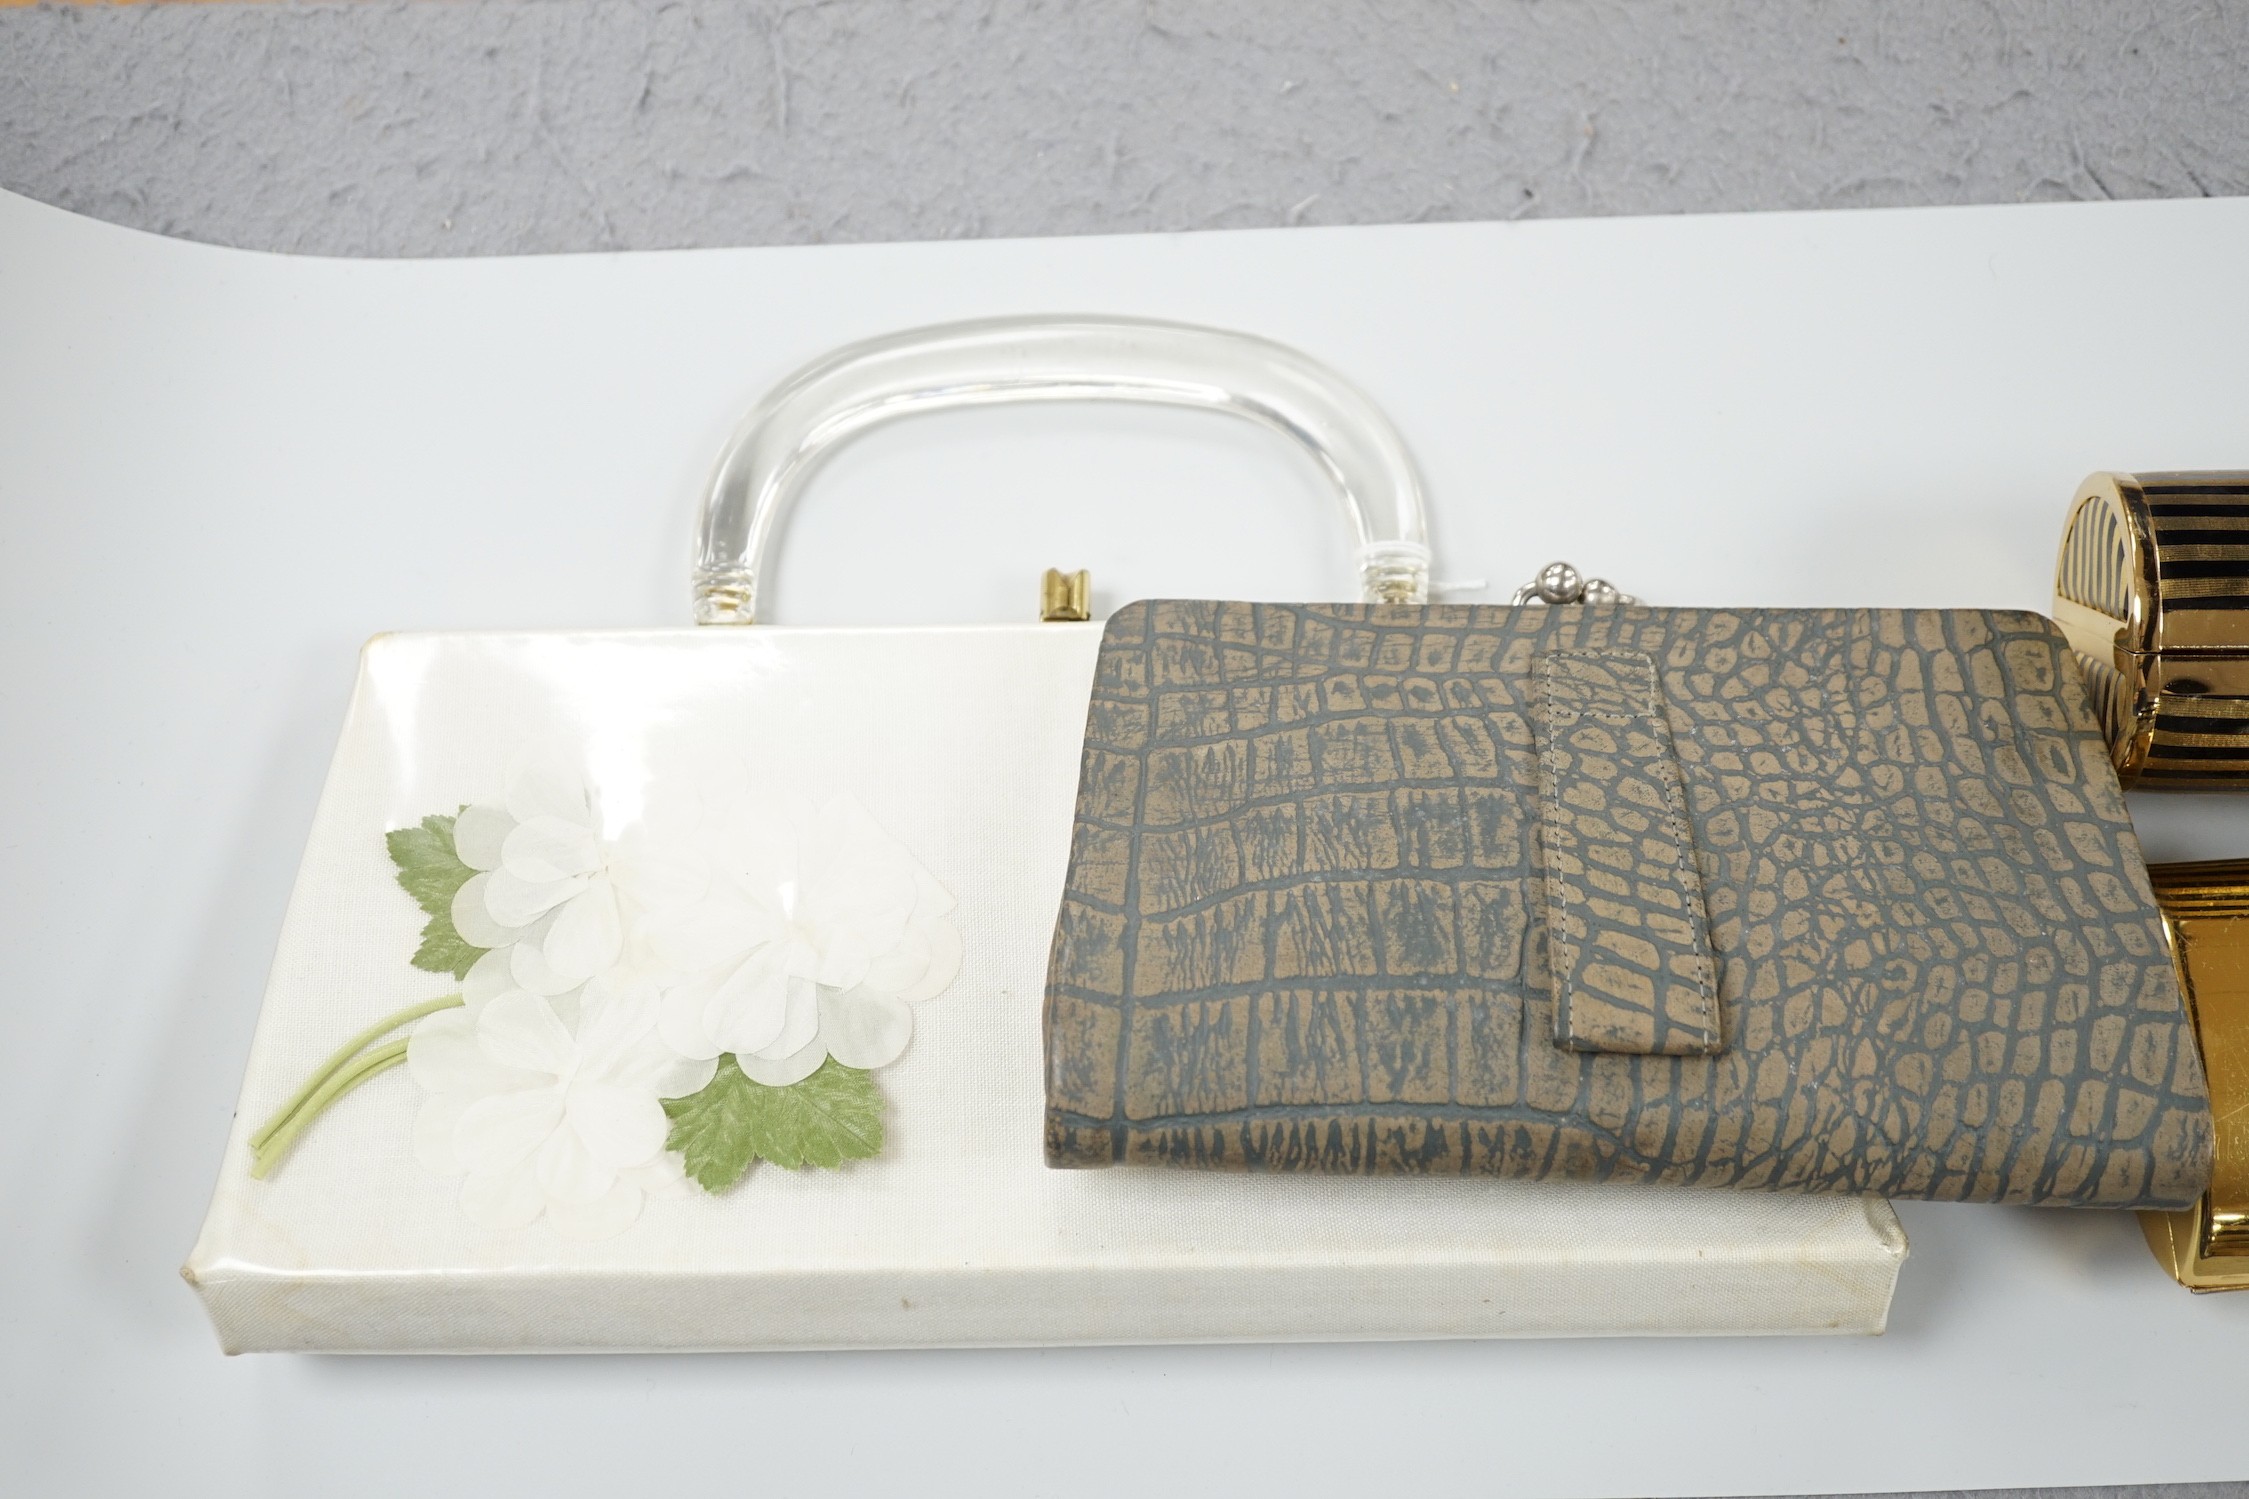 Two 1960's gilt metal ladies evening bags, a metal and wooden bag, a 1950's plastic and fabric bag - Image 2 of 8